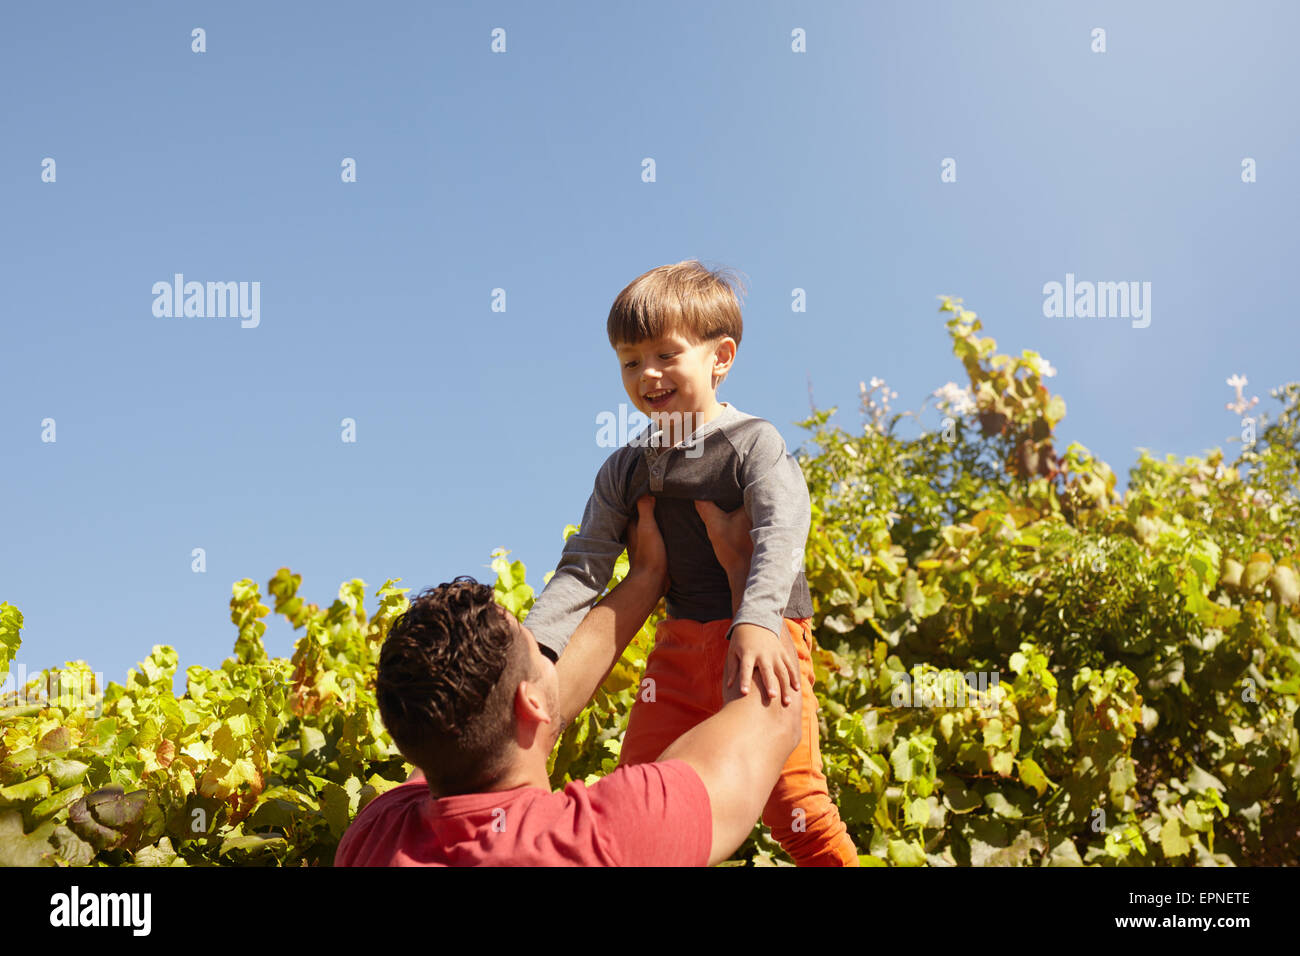 Shot of father lifting his son high in the air. Happy father and son playing outdoors on a sunny day. Stock Photo